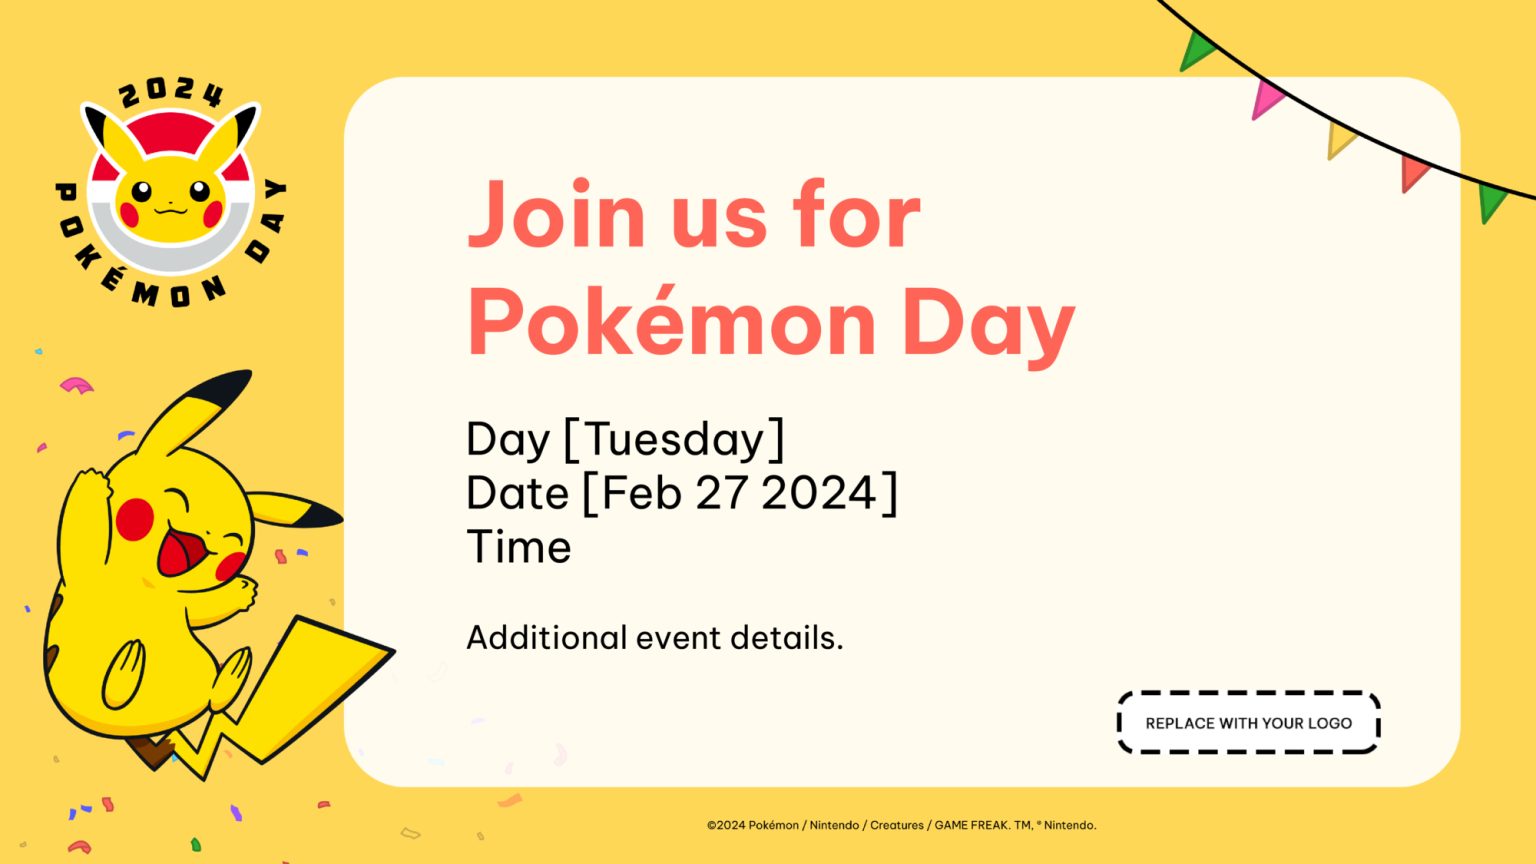 "Pokemon Day" Events Coming to Pokemon Leagues on February 27th